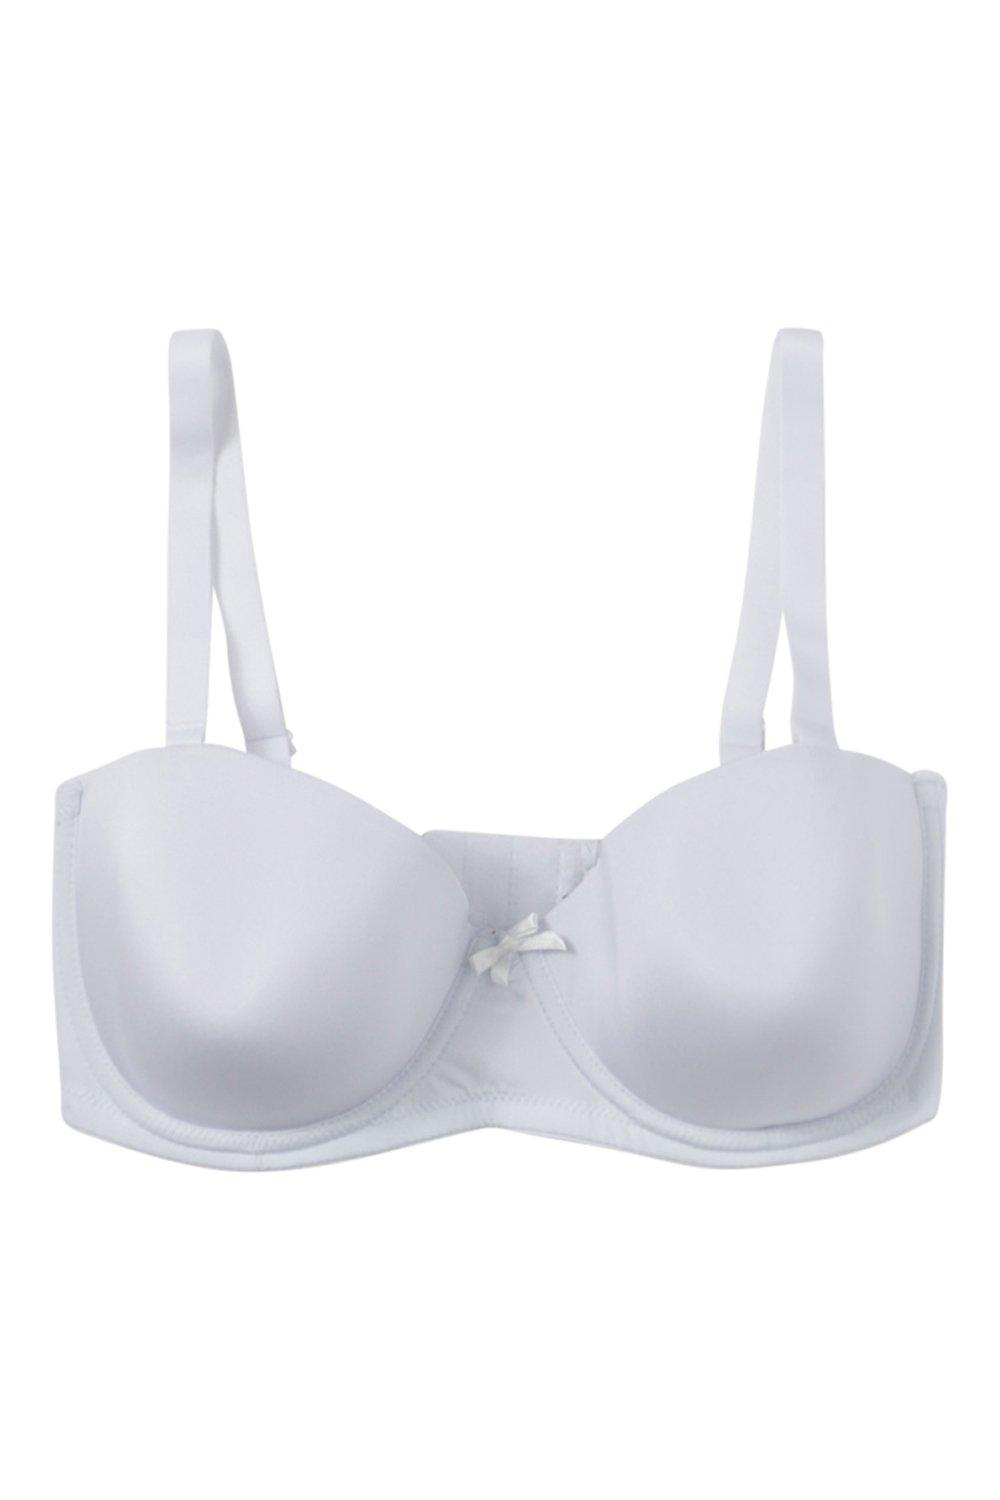 Cathalem Backless Bras for Dresses Large Bust Women Lingerie Strapless  Front Buckle Lift Bra Bra Hooks Replacement Heavy Duty Underwear White Large